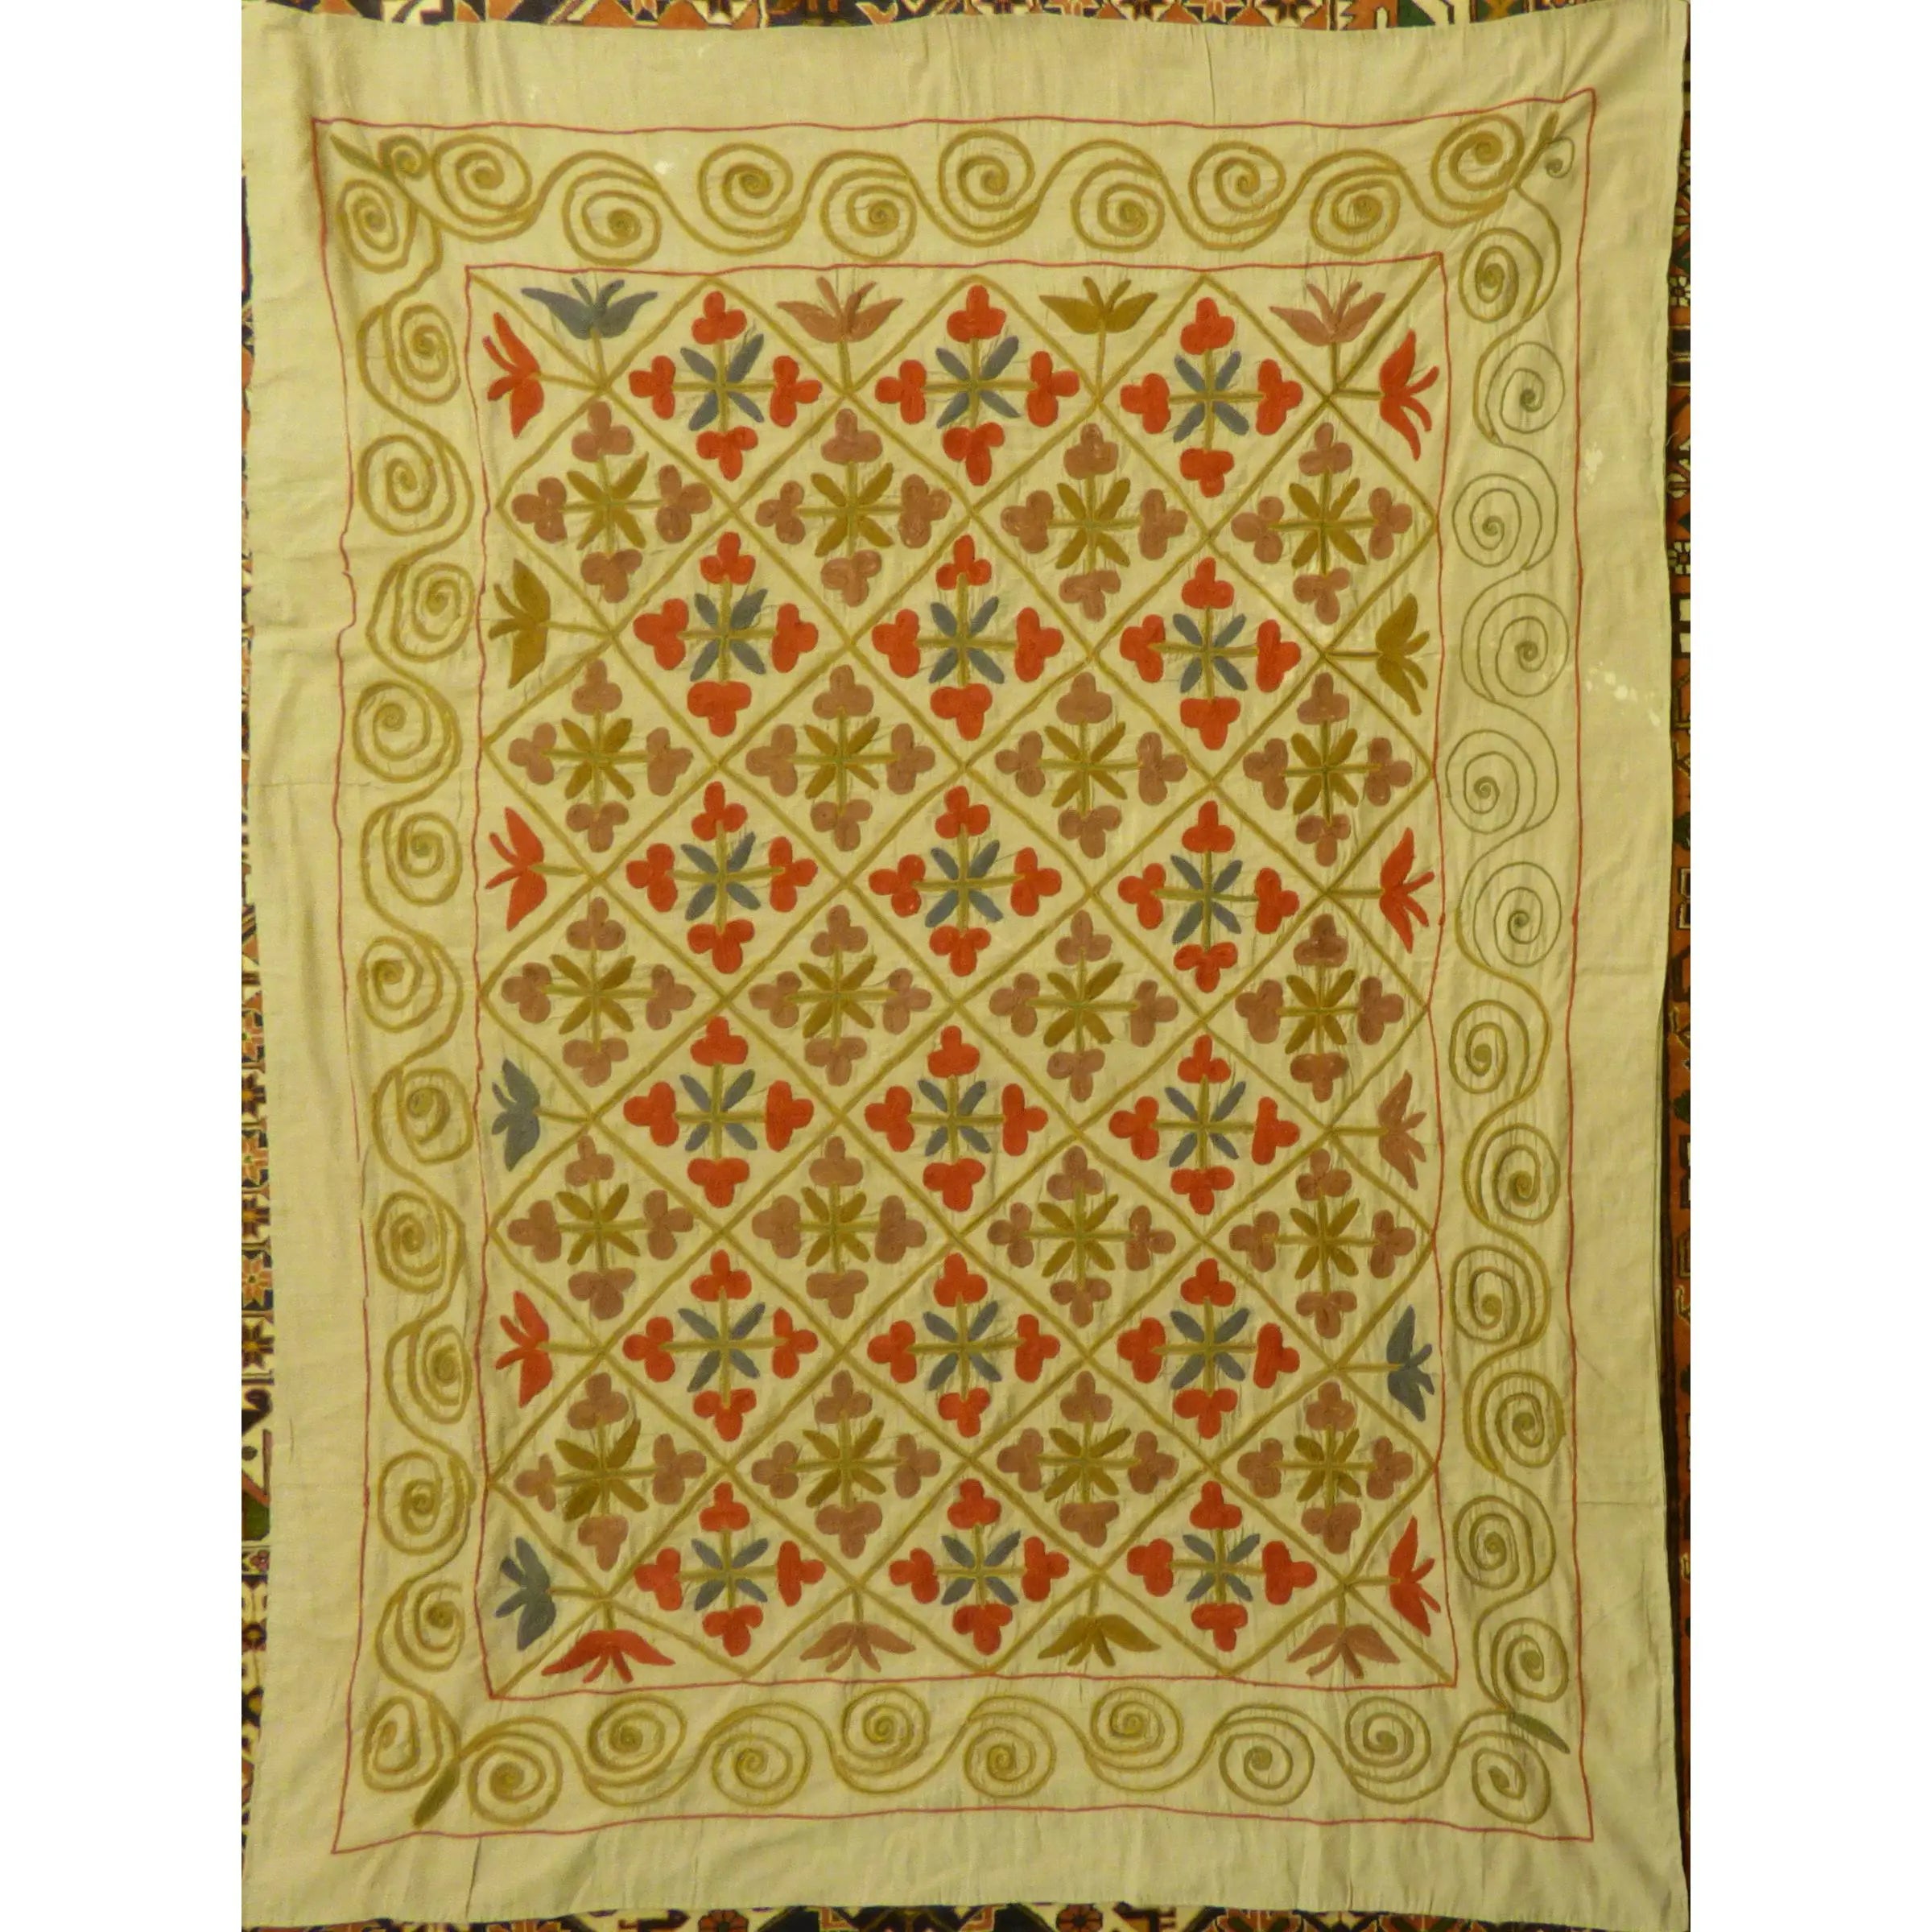 Fine Art Handmade Afghanistan Cotton Ready To Hang For Home Wall Art Decoration   70"  X  57" Panwd0001